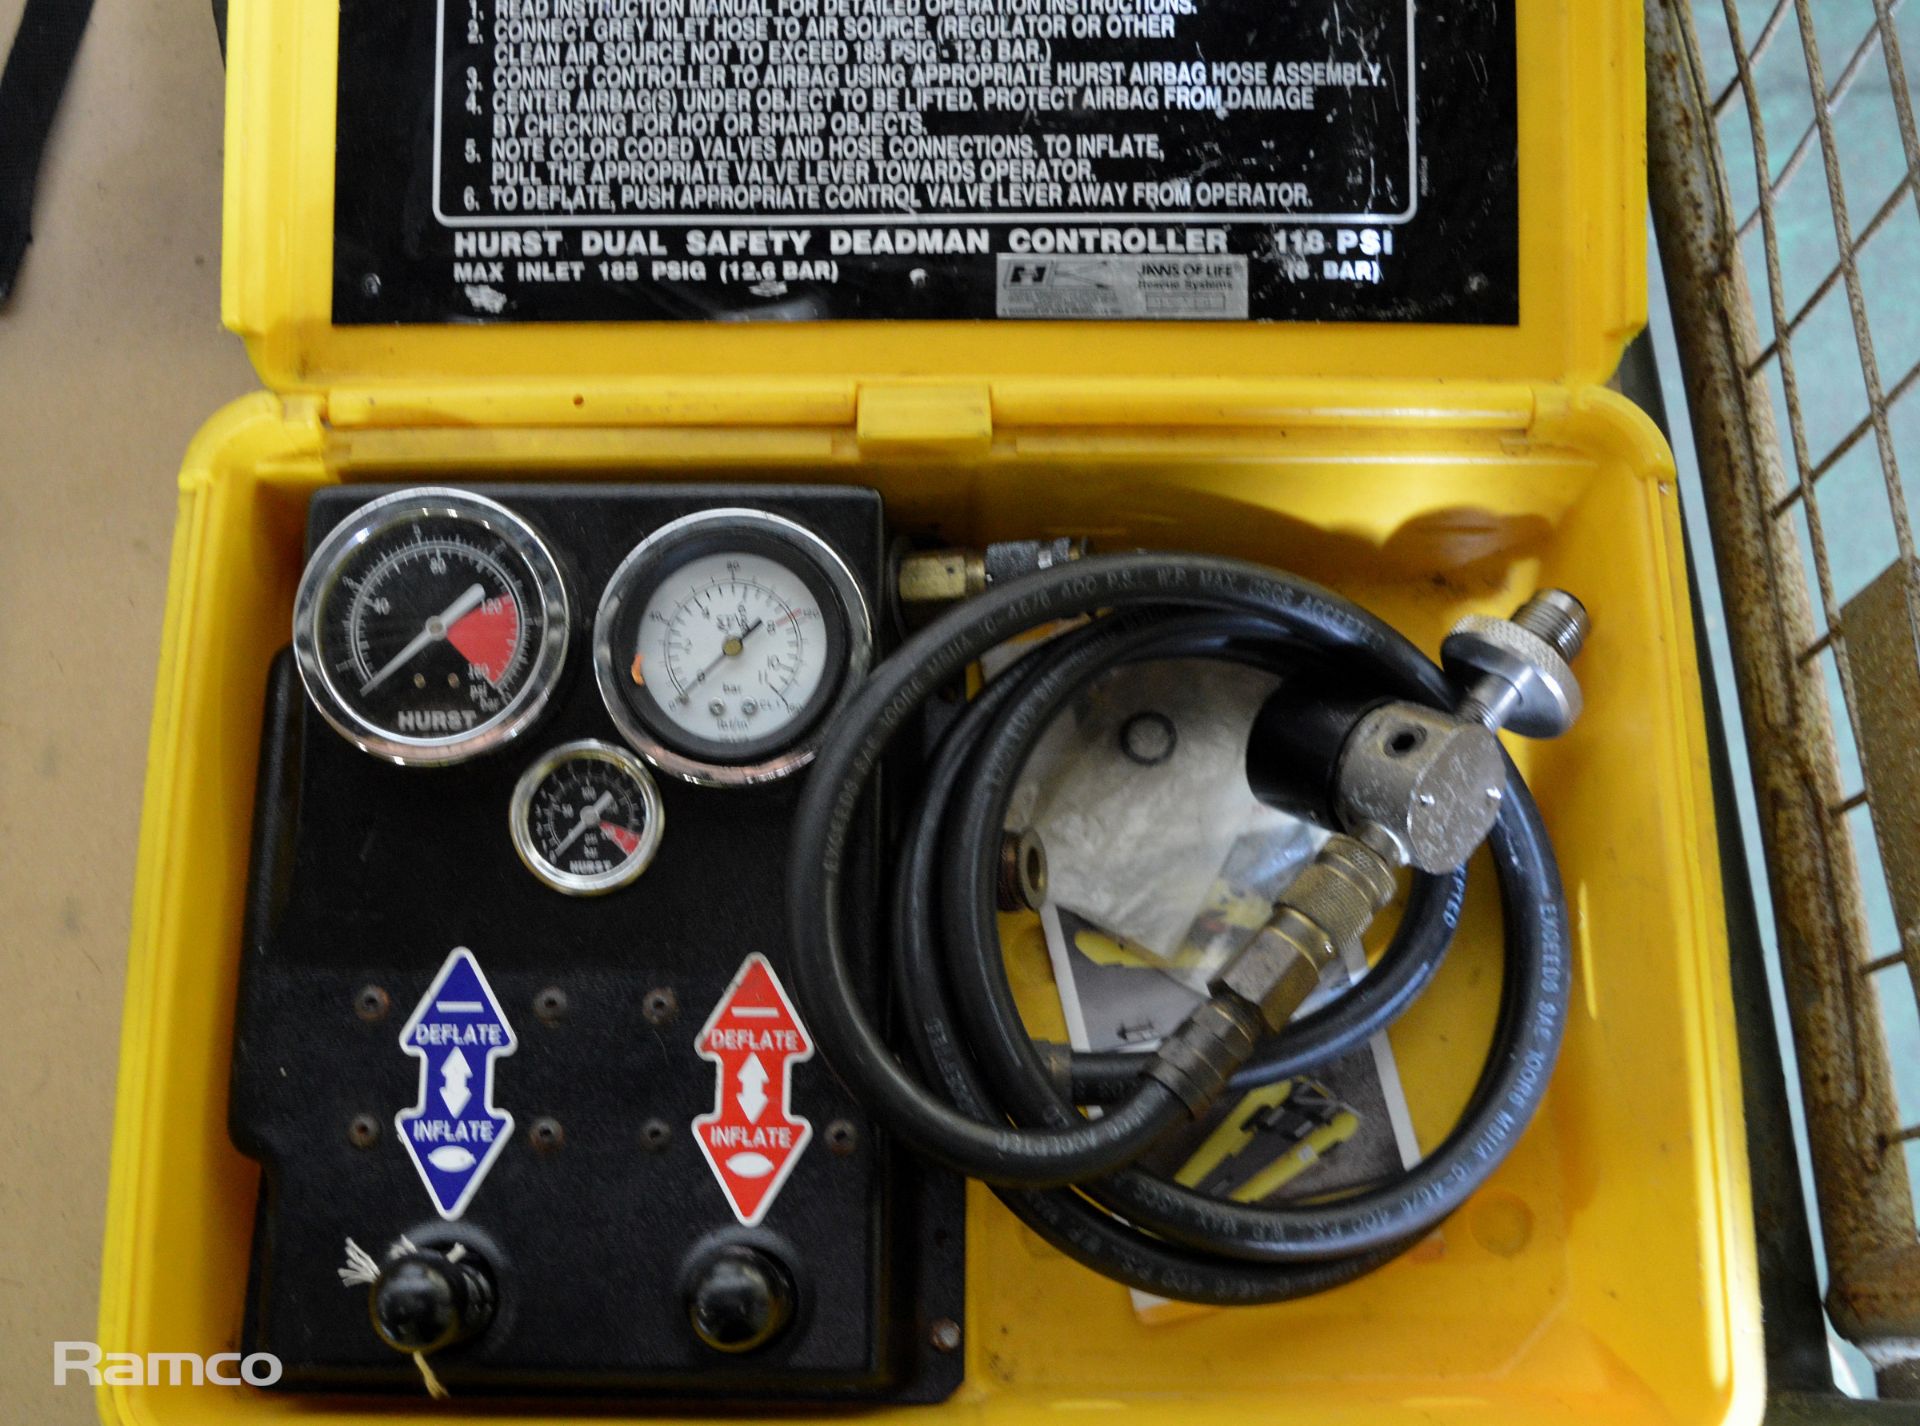 MFC Survival Airbag Controller Unit, Rescue Airbag Controller Unit, Hurst Airbag Controller Unit - Image 4 of 5